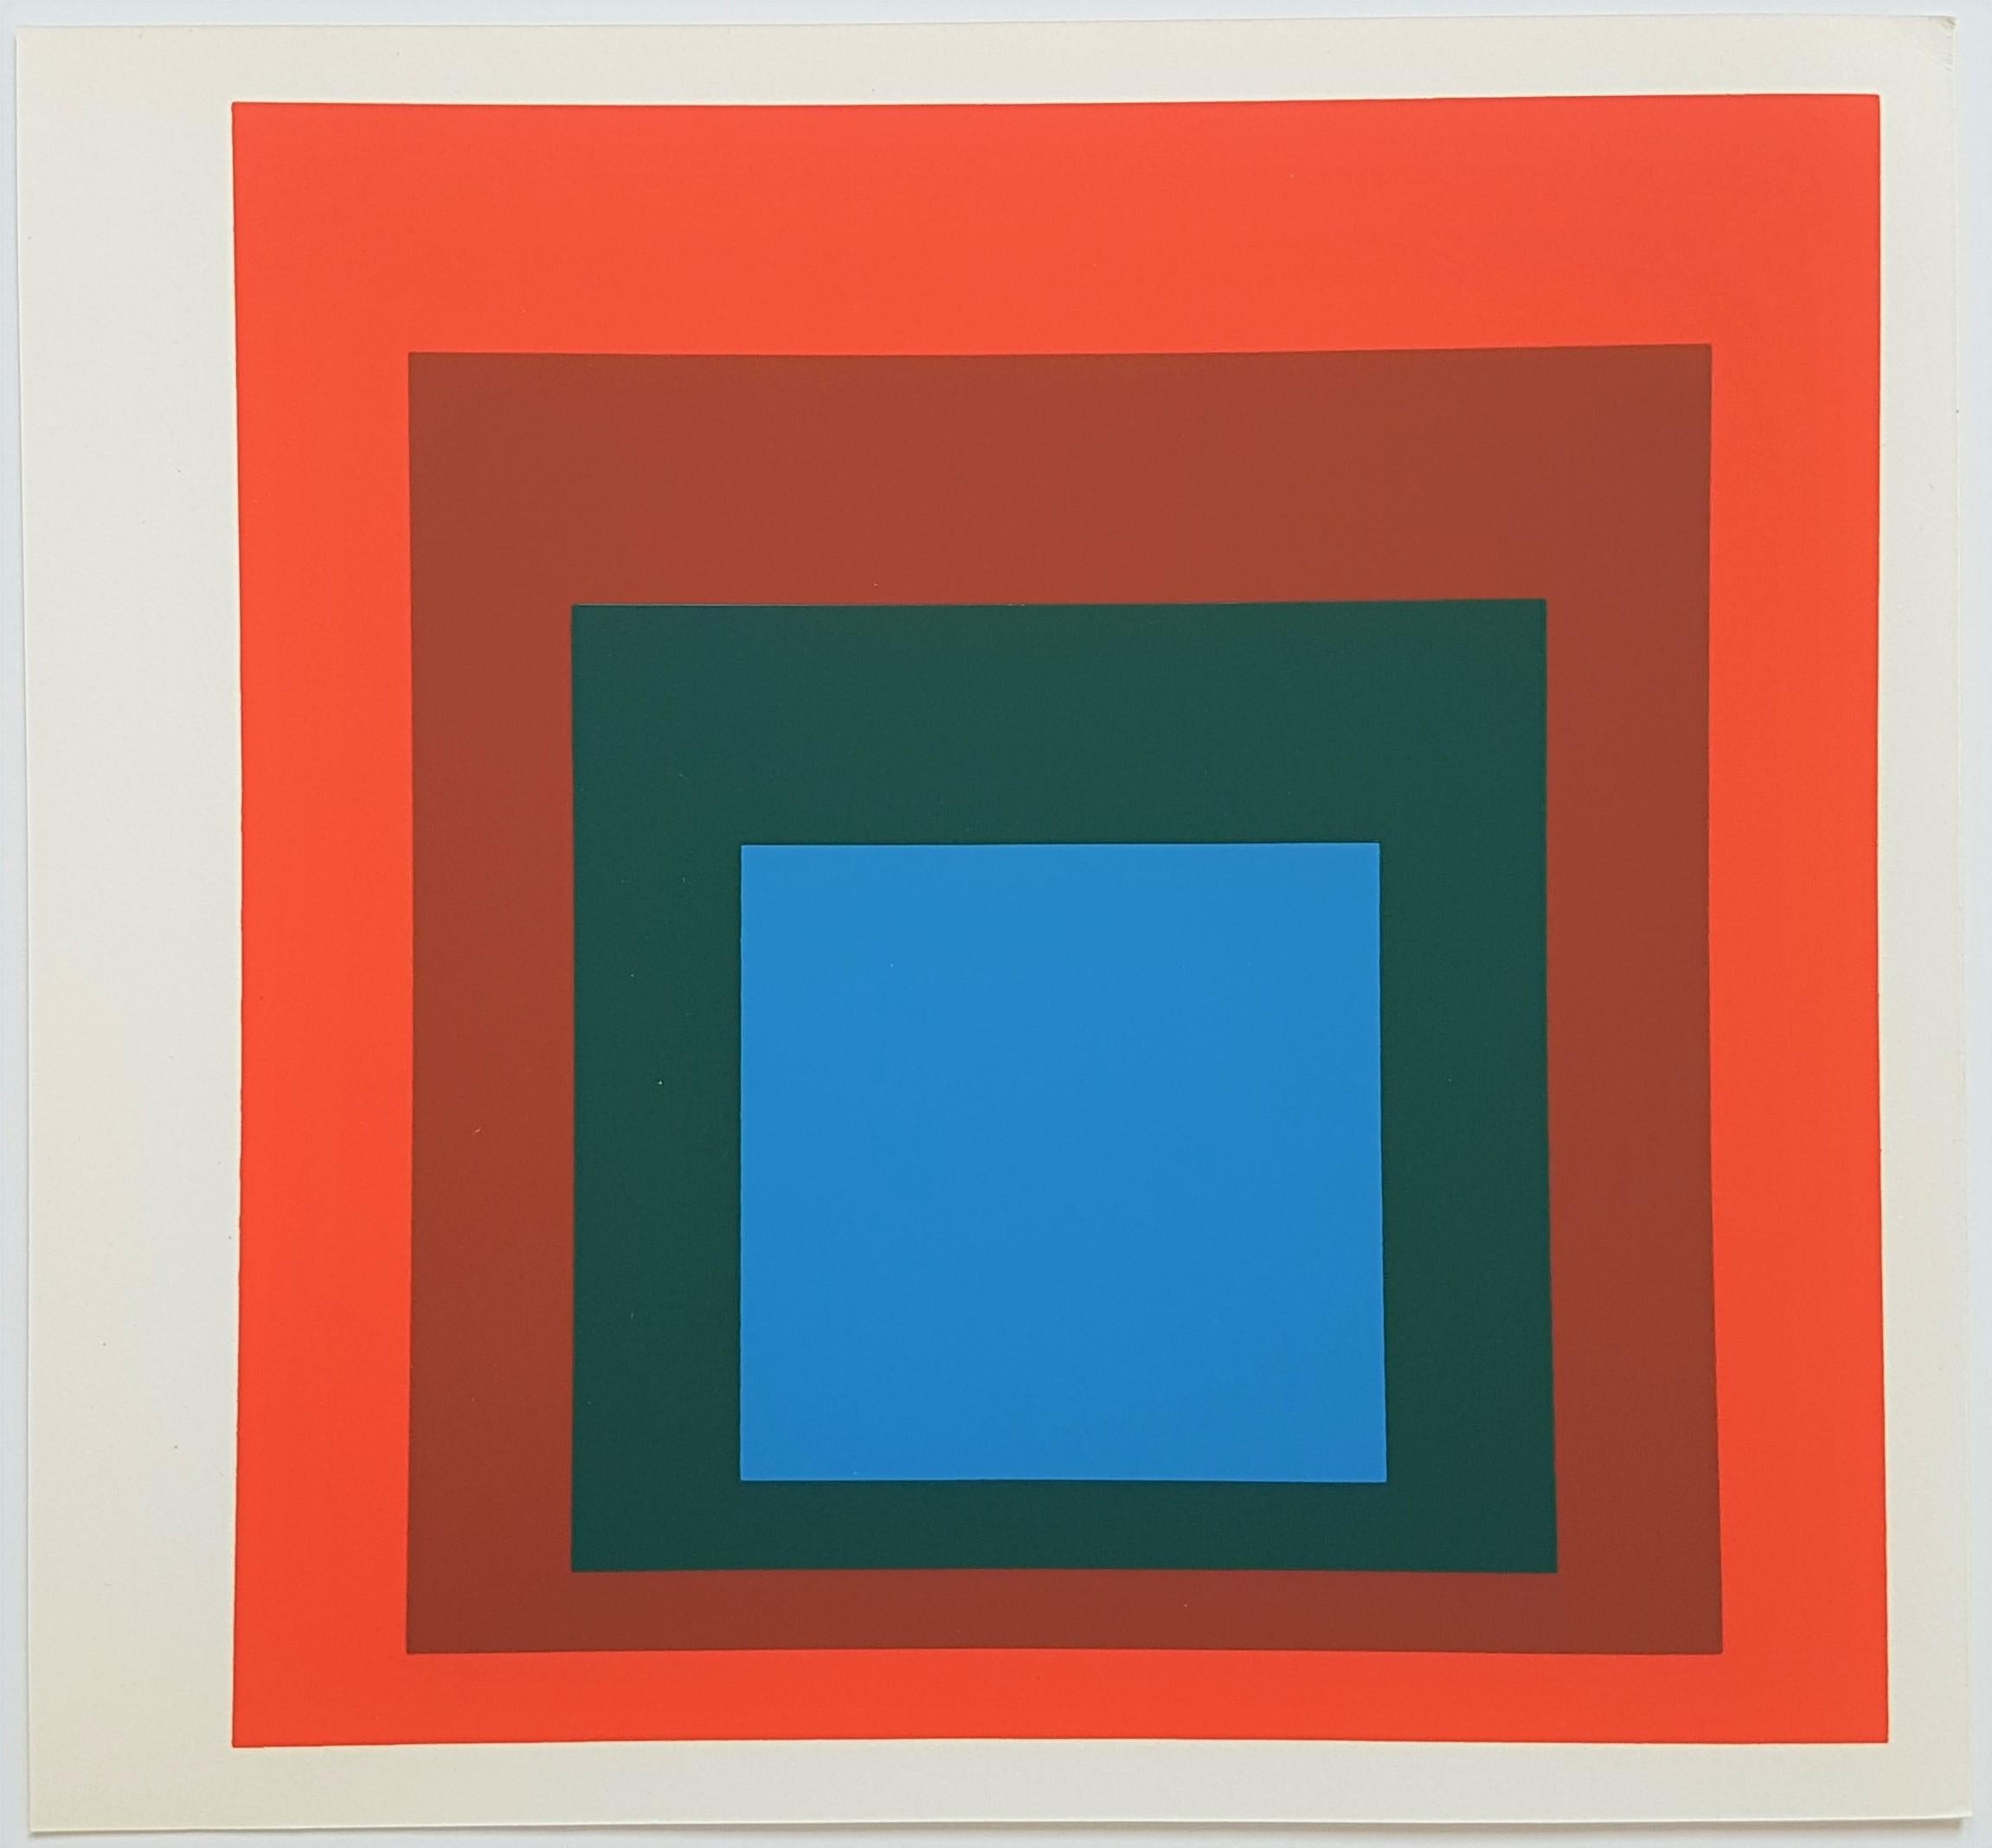 Homage to the Square: Blue + Darkgreen with 2 Reds (~35% OFF LIST PRICE) - Print by (after) Josef Albers